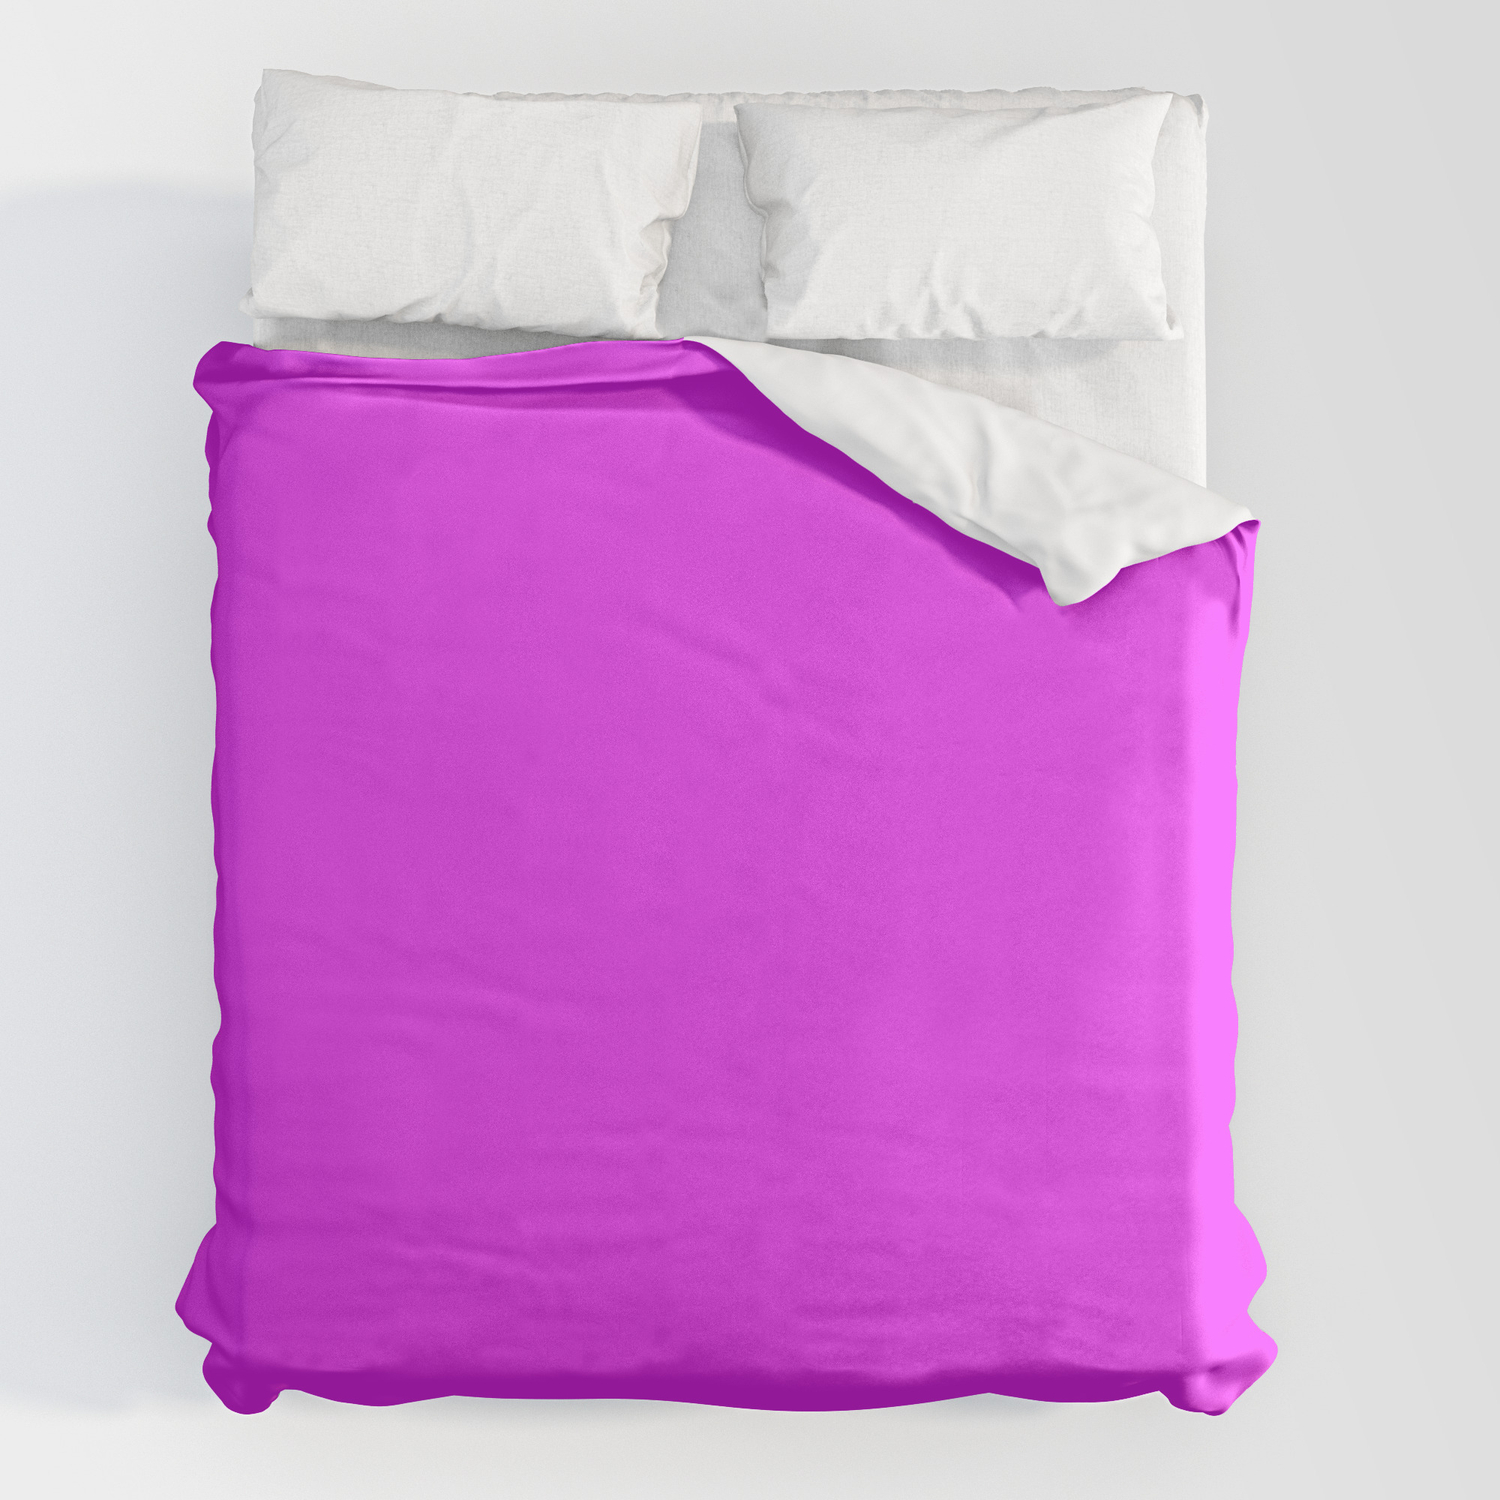 Solid Bright Neon Pink Color Duvet, Bright Pink Duvet Cover